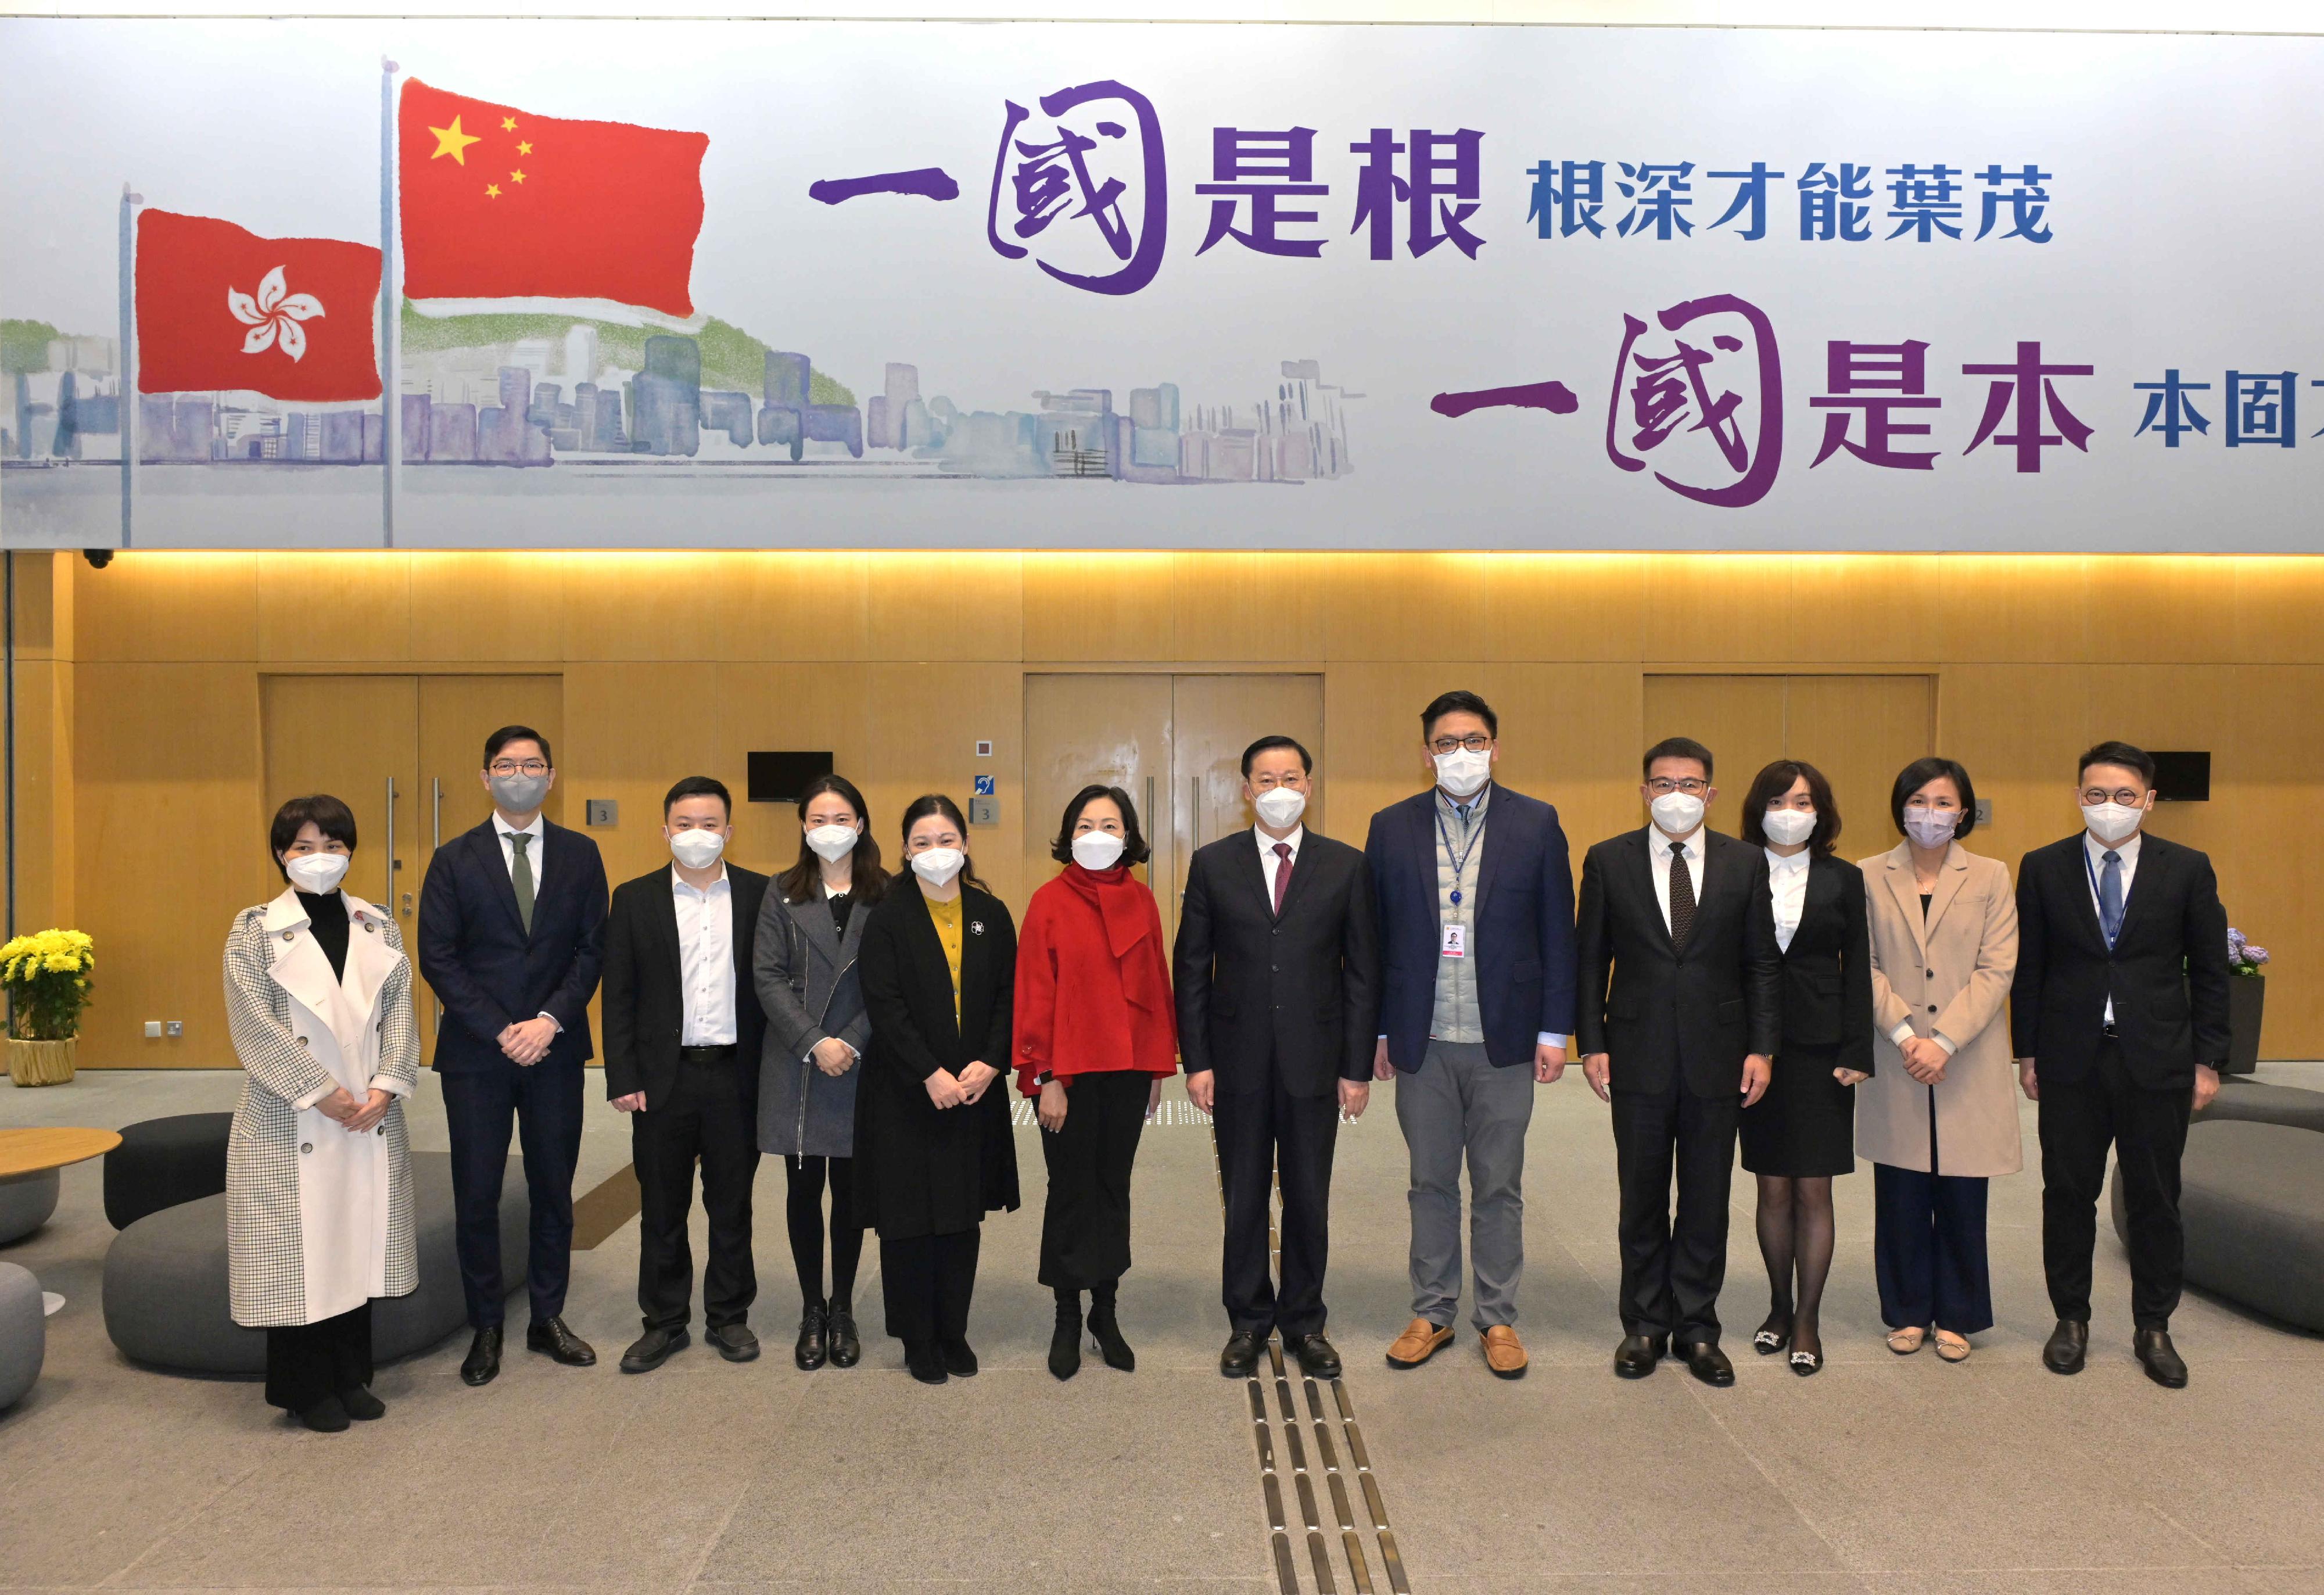 The Secretary for Home and Youth Affairs, Miss Alice Mak (sixth left), together with the Under Secretary for Home and Youth Affairs, Mr Clarence Leung (fifth right), are pictured with a Foshan delegation led by Member of the Standing Committee of the Foshan Municipal Committee of the Communist Party of China and the Head of the United Front Work Department of the Foshan Municipal Committee of the Communist Party of China Mr Ding Xifeng (sixth right), before a meeting today (January 17).